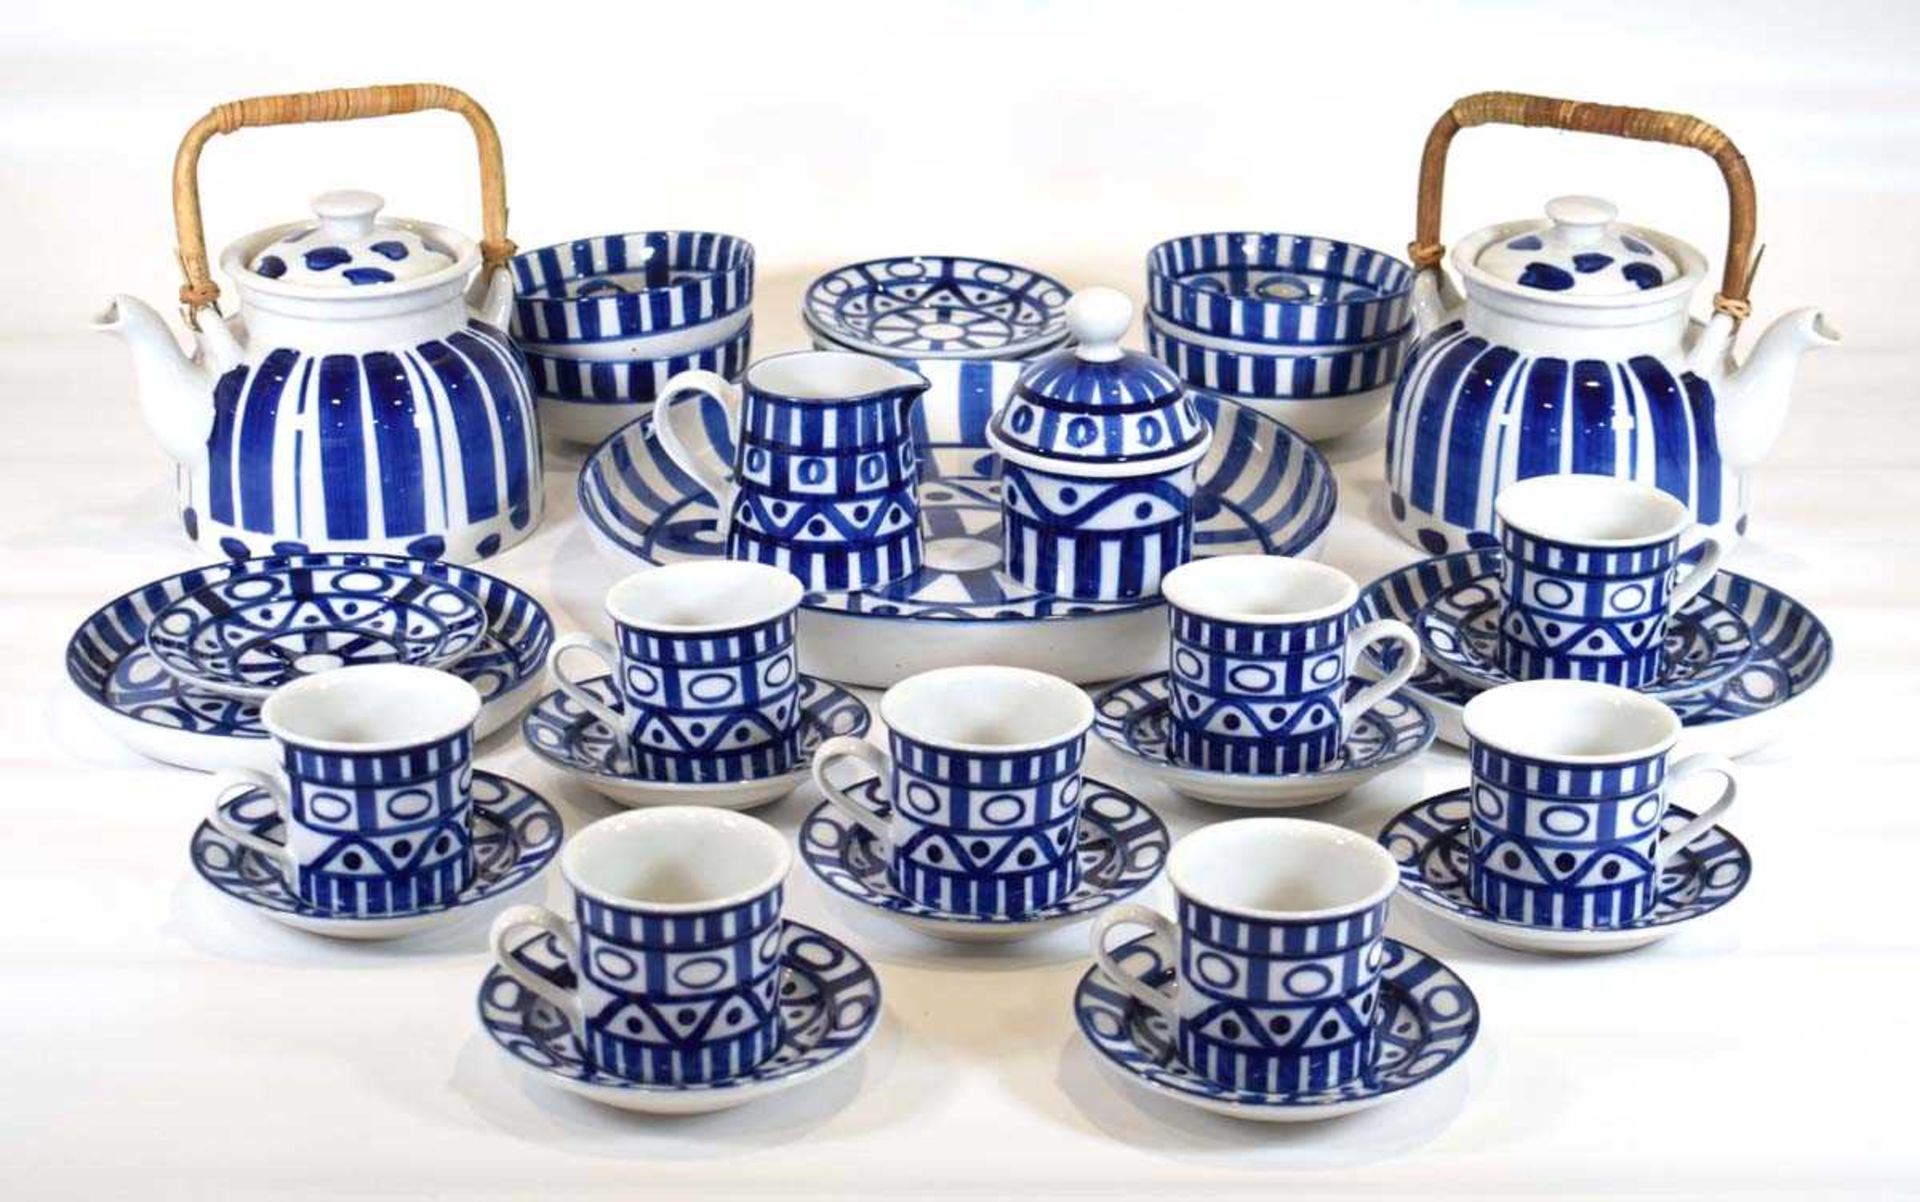 A Dansk (International) Designs part tea service decorated in the 'Arabesque' pattern including